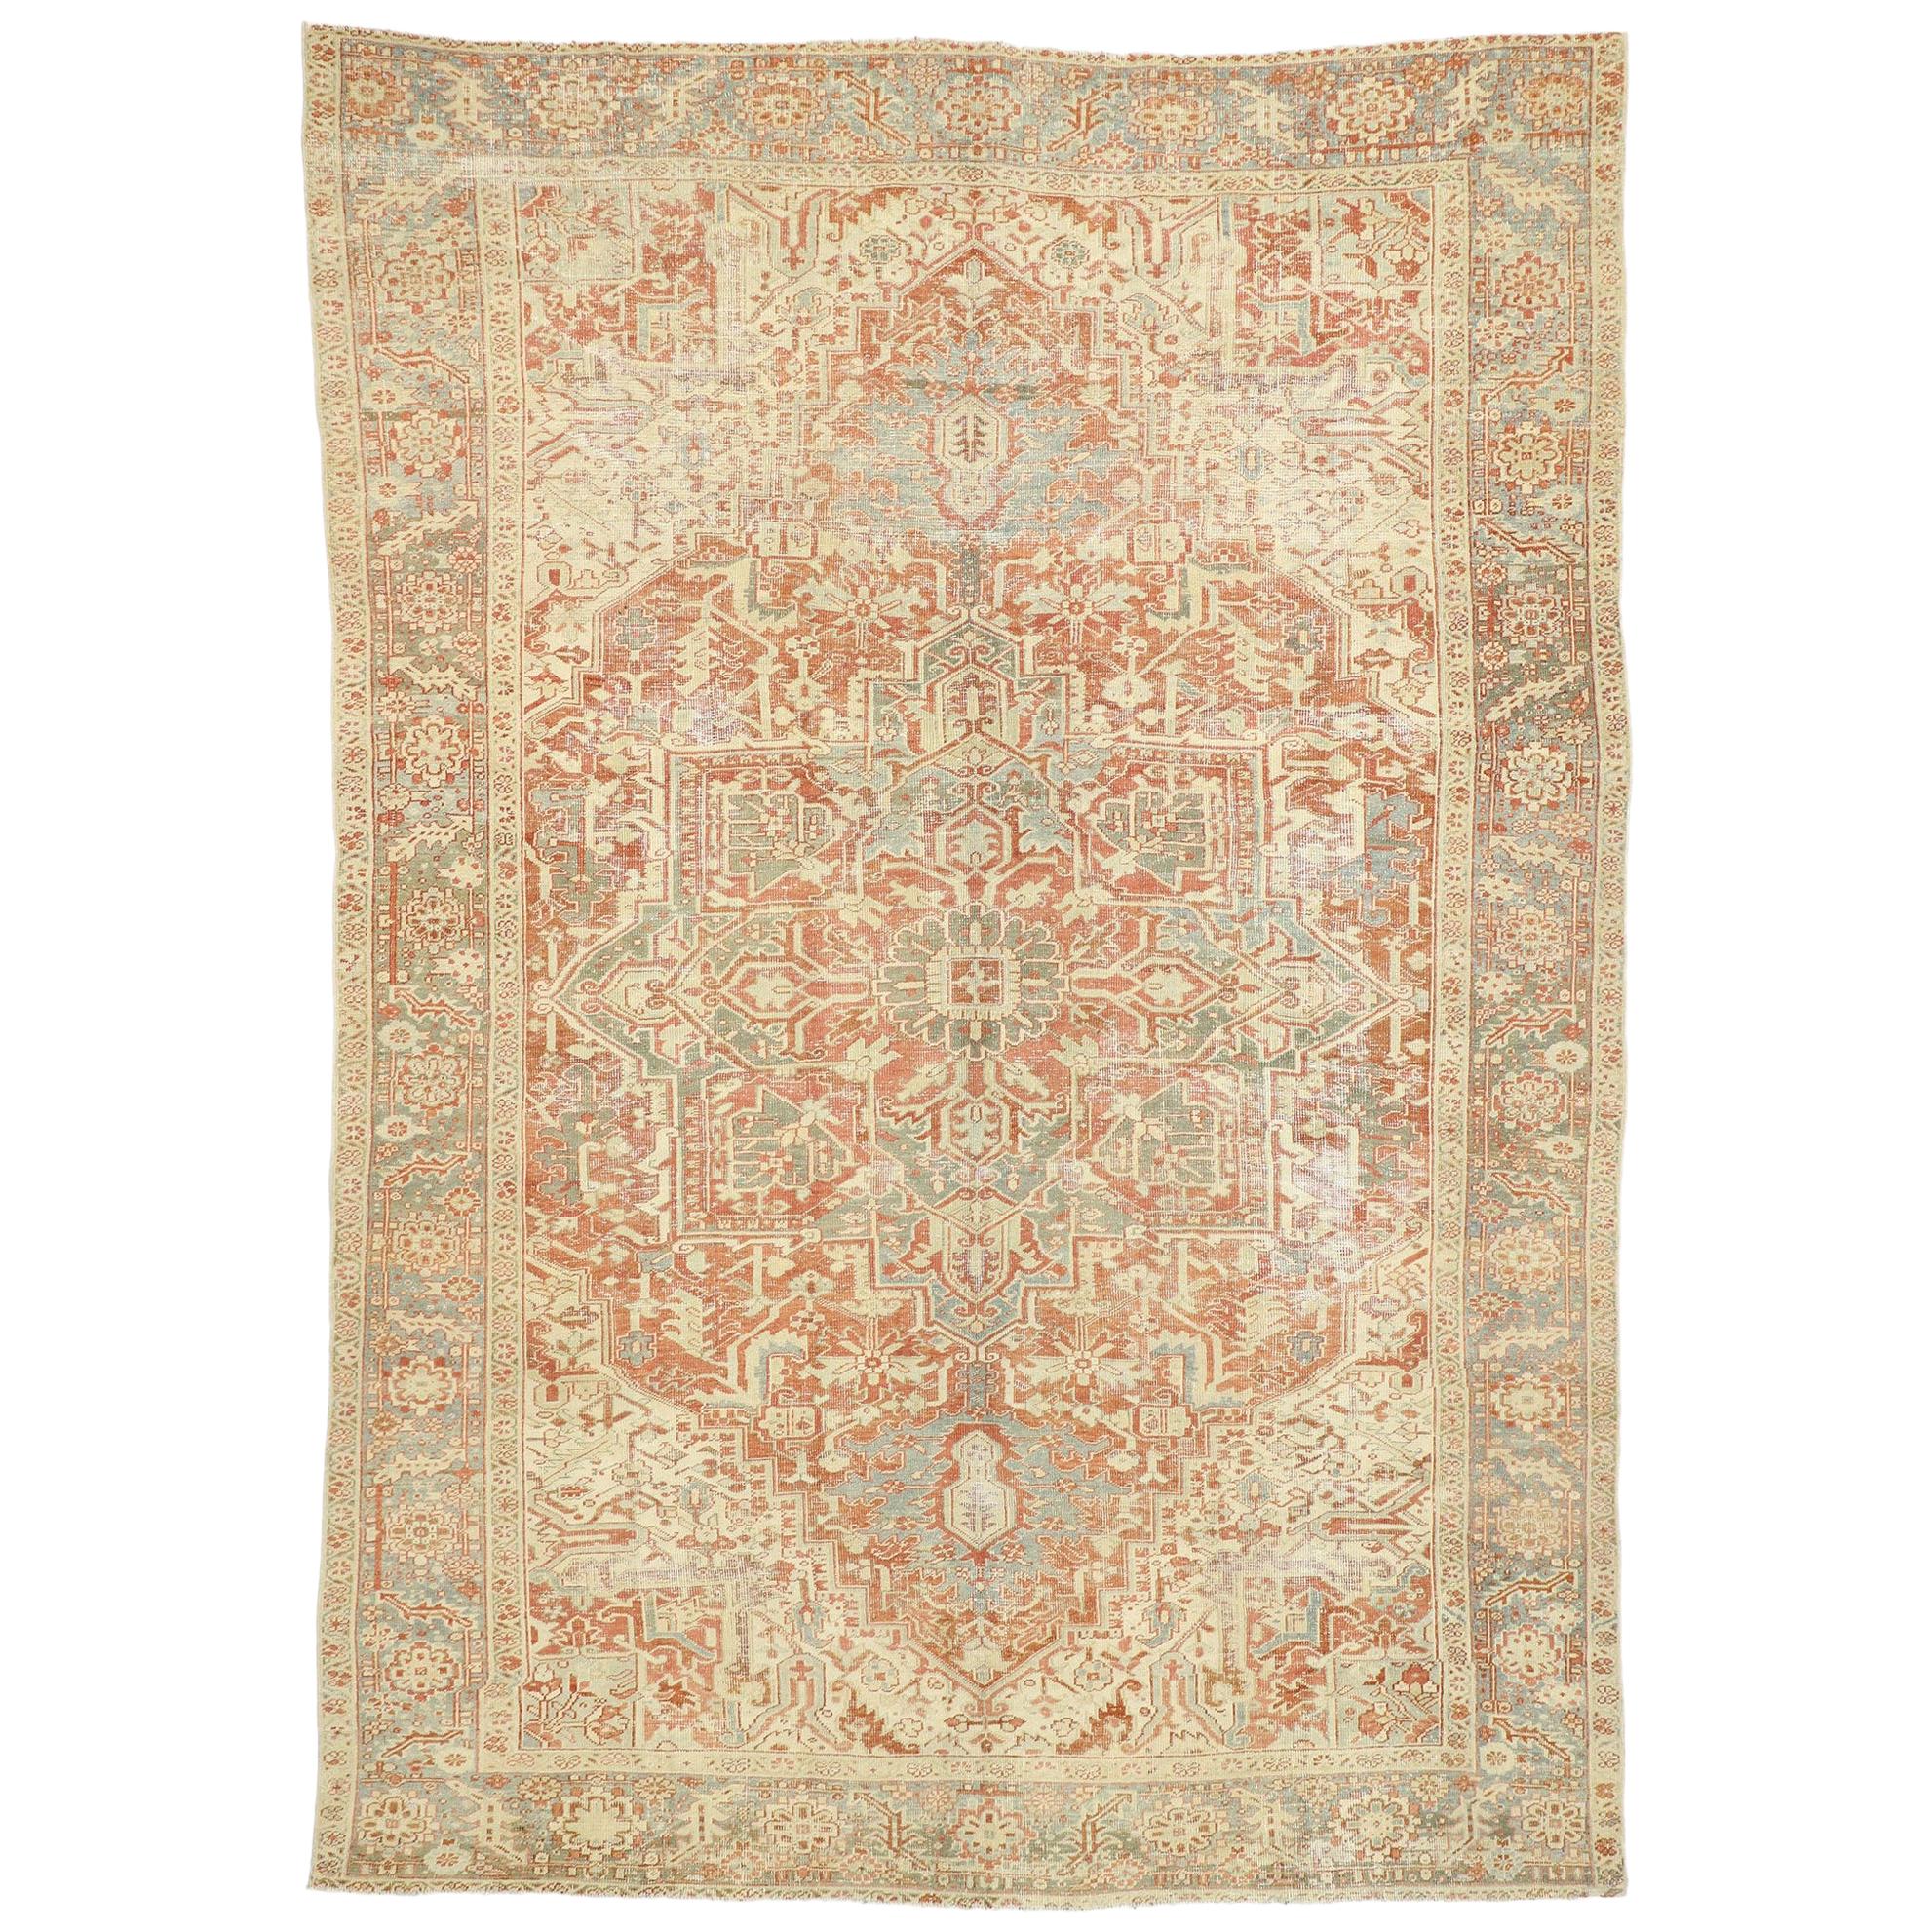 Distressed Antique Persian Heriz Design Rug with Rustic Bungalow Style